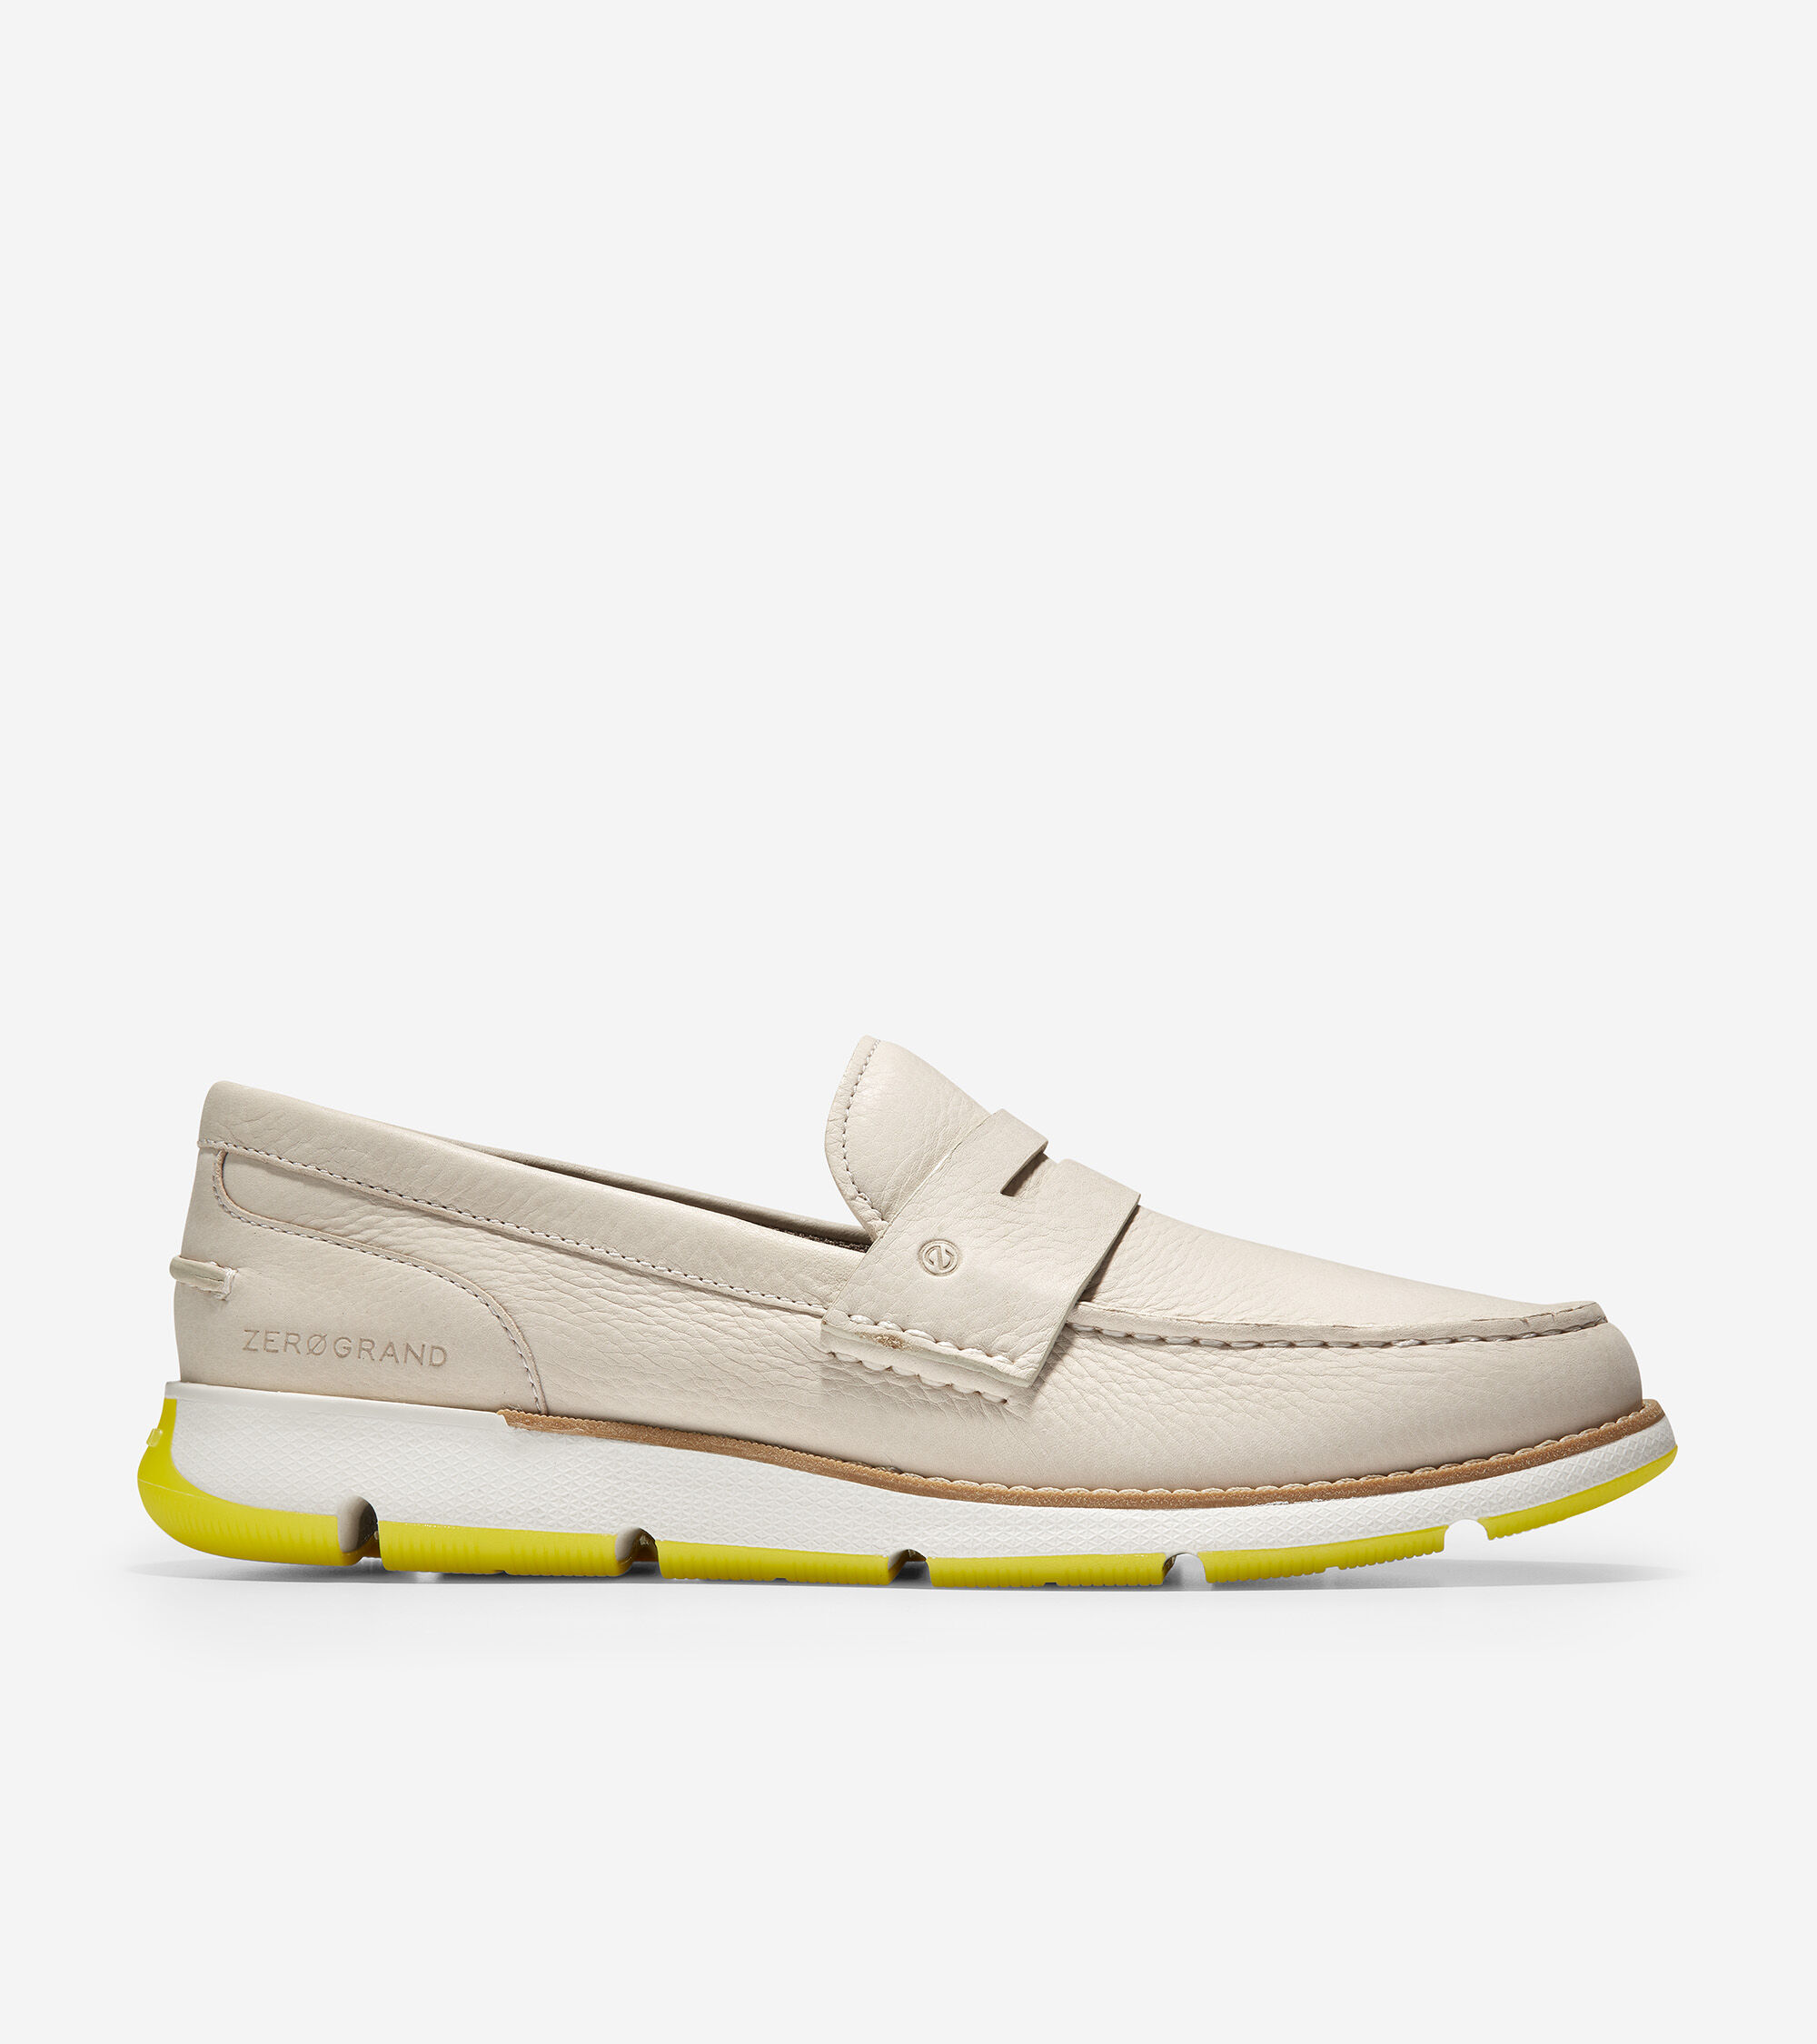 Men's Loafers \u0026 Driving Shoes | Cole Haan